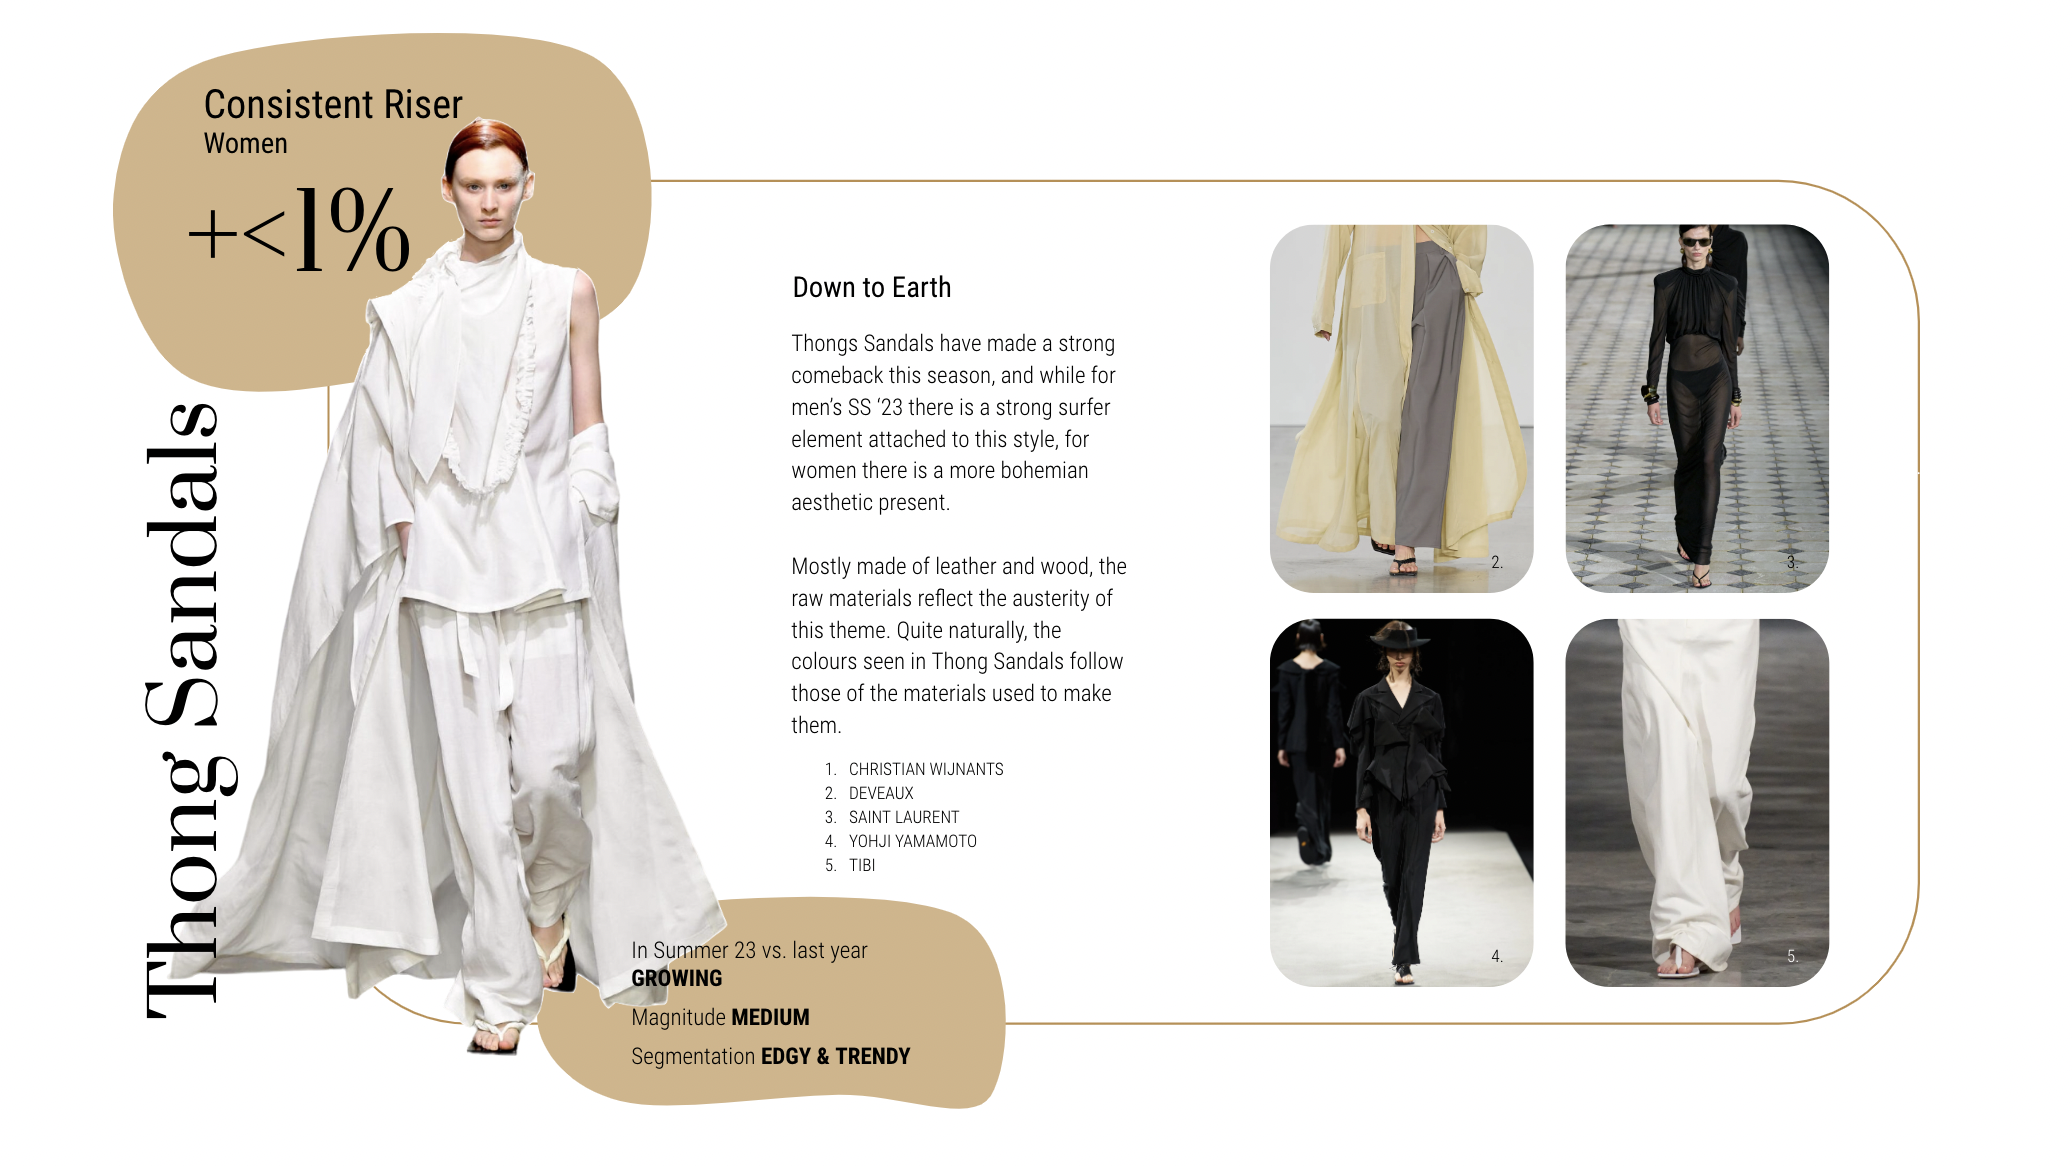 Extract from the sample SS '23 Women's Fashion Weeks Report